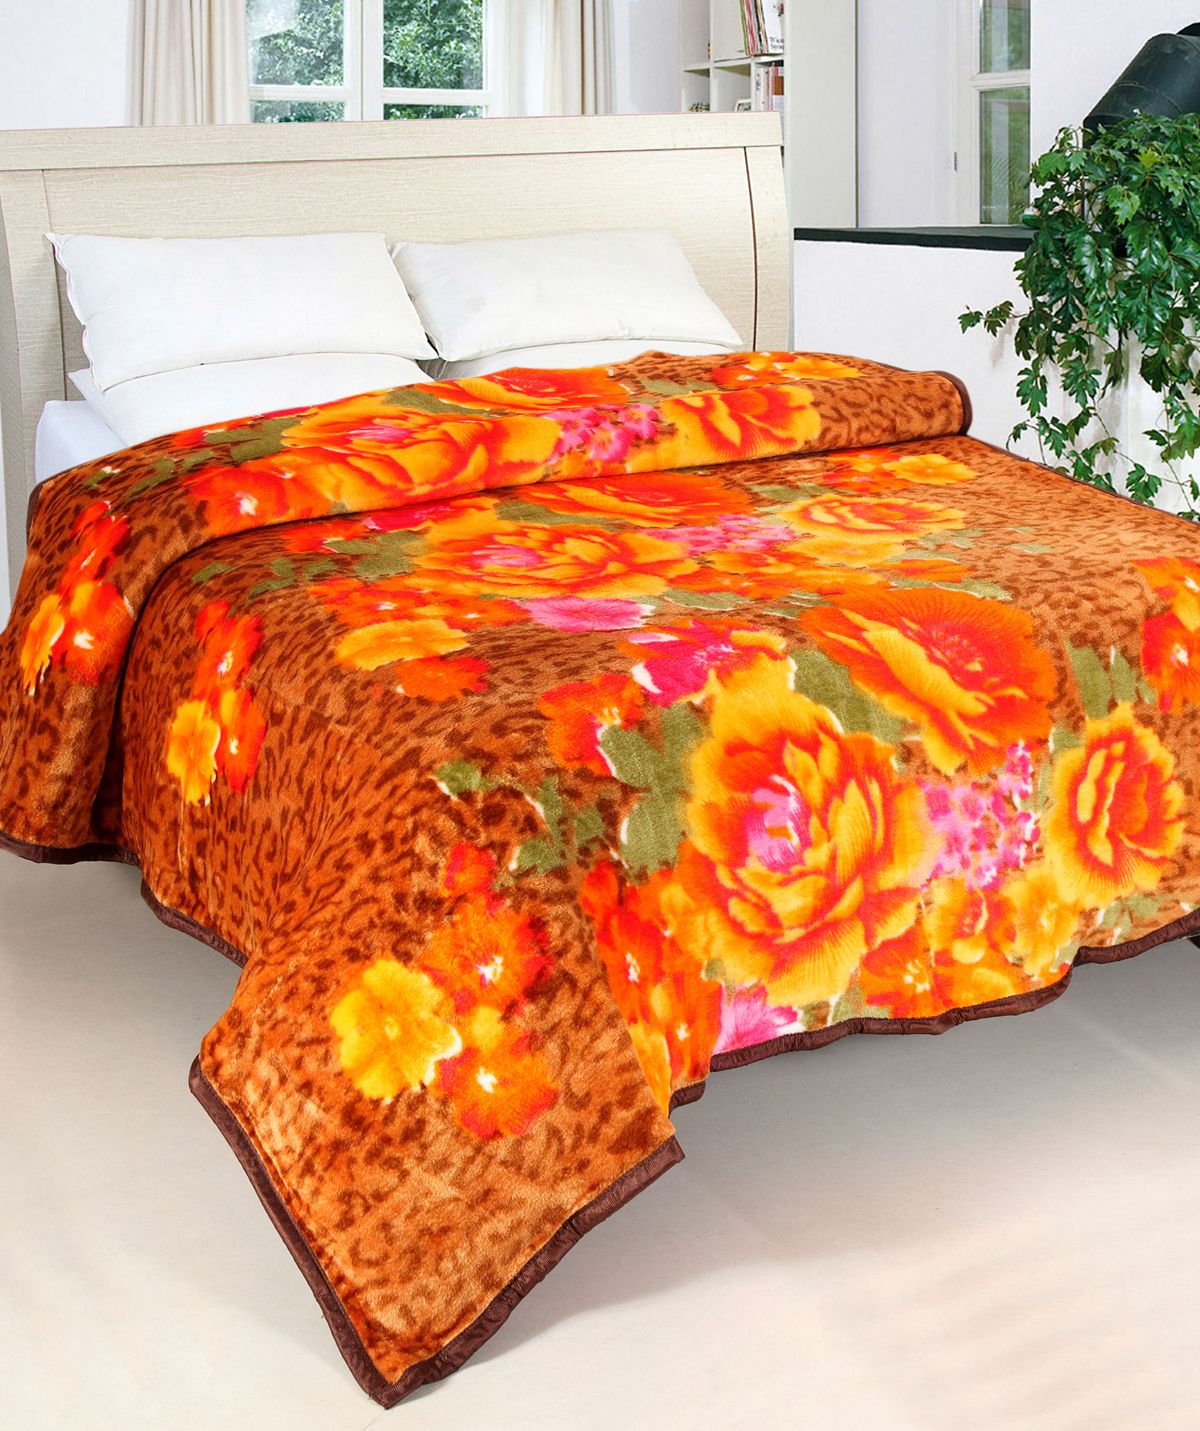     			Furhome Double Poly Mink Floral Winter Blanket